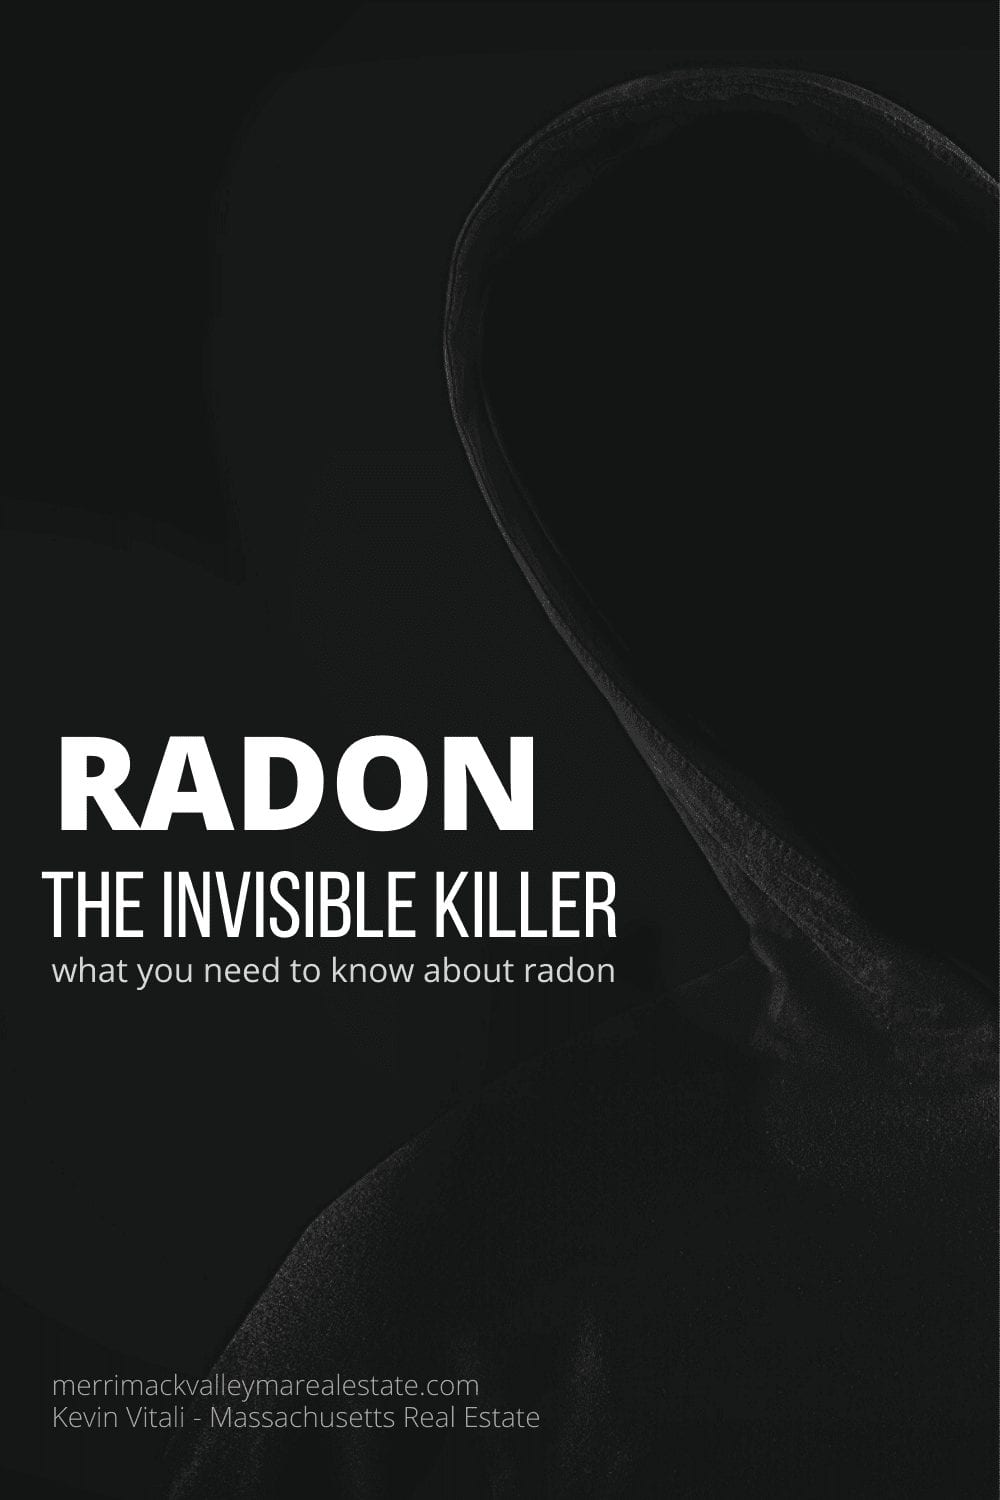 Radon Gas in the home- The Invisible Killer